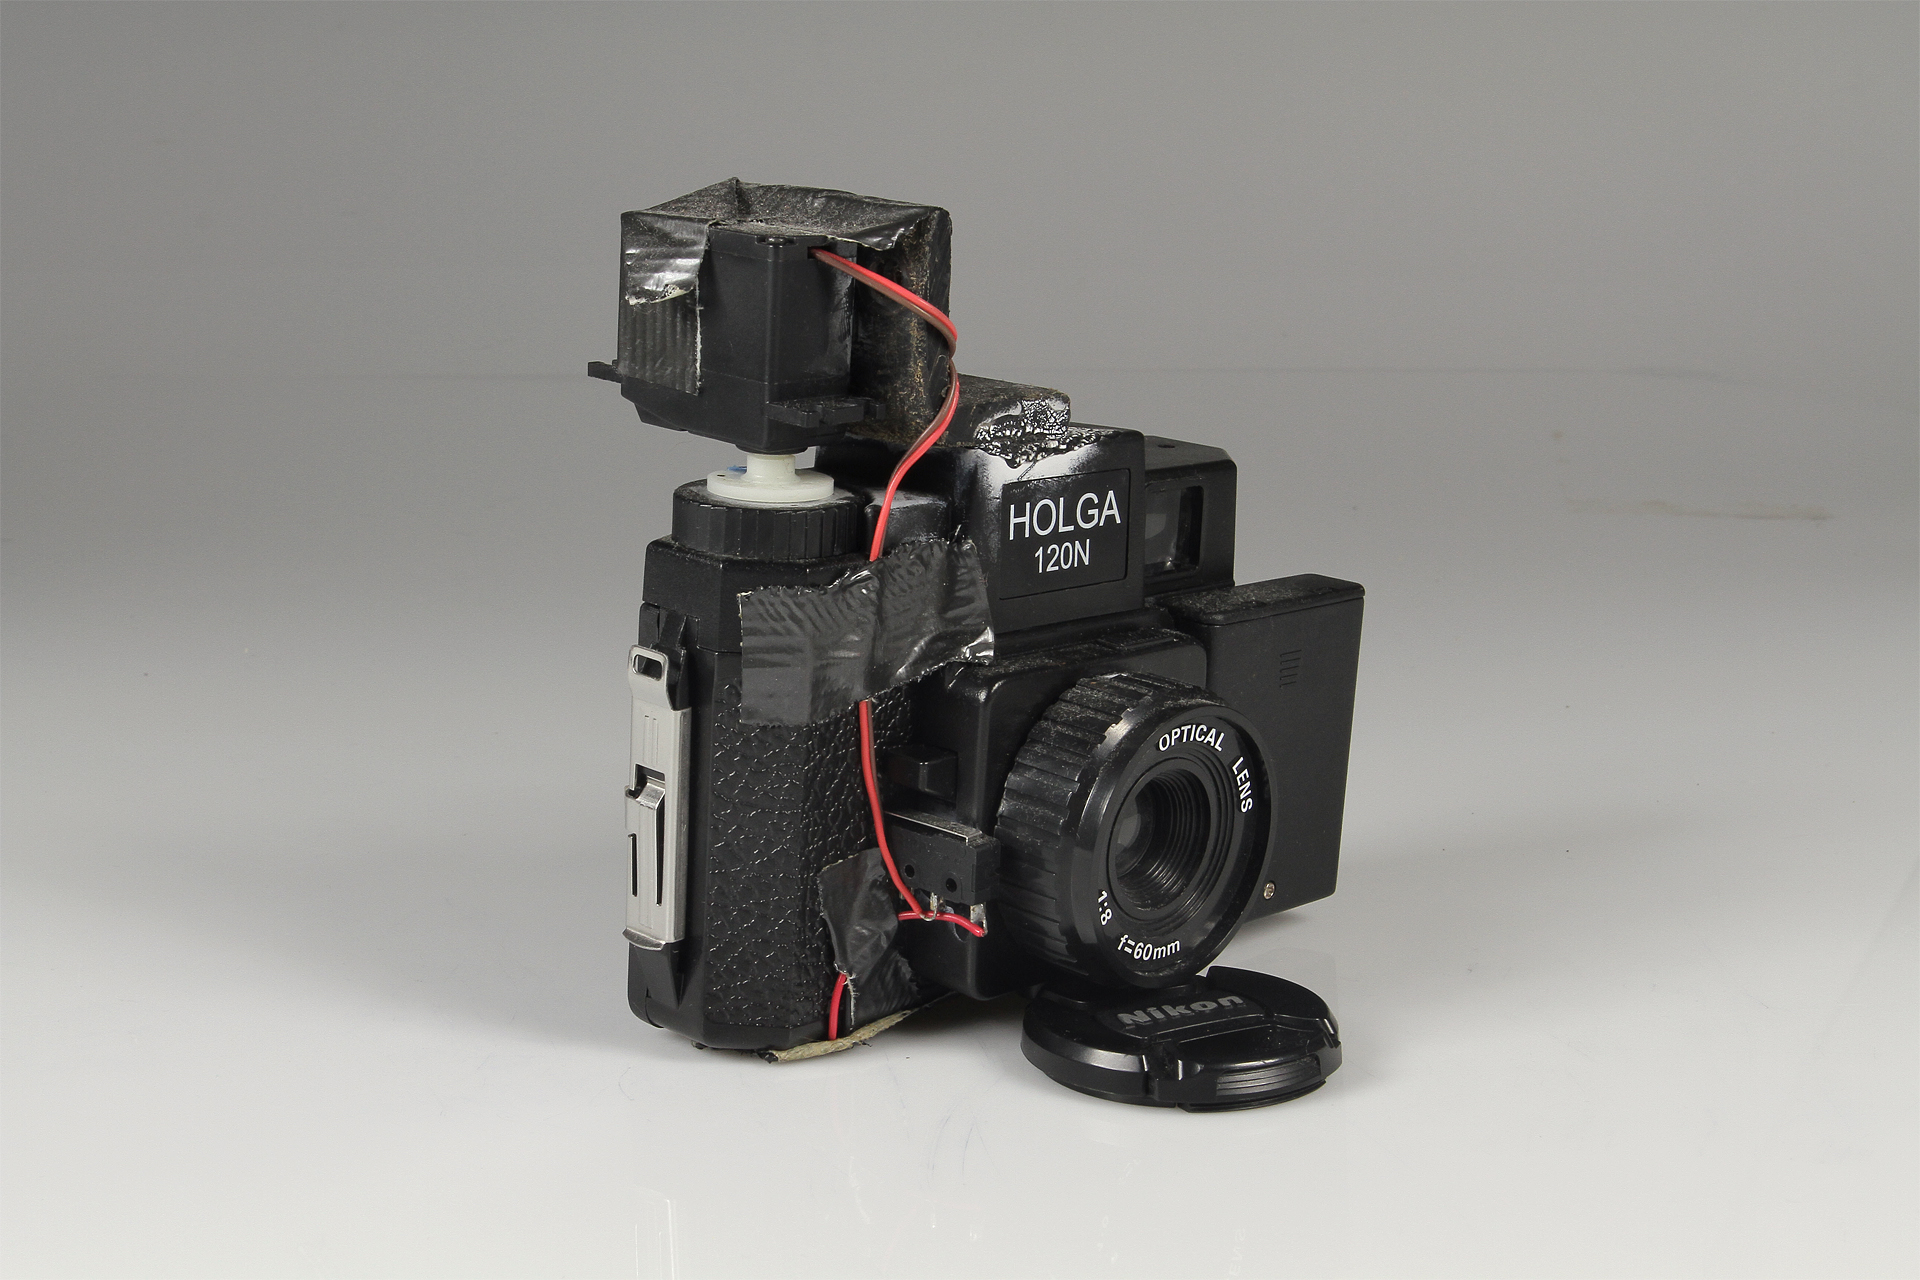   Holga Slitscan Camera  2013.&nbsp; Modified Holga for Strip Photography.&nbsp; Holga camera, modified servo motor, 3xAAA battery pack, SPST switch, plastic L bracket, black-rubberized 4x5 film (to make the slit in the camera), electrical wire, duct